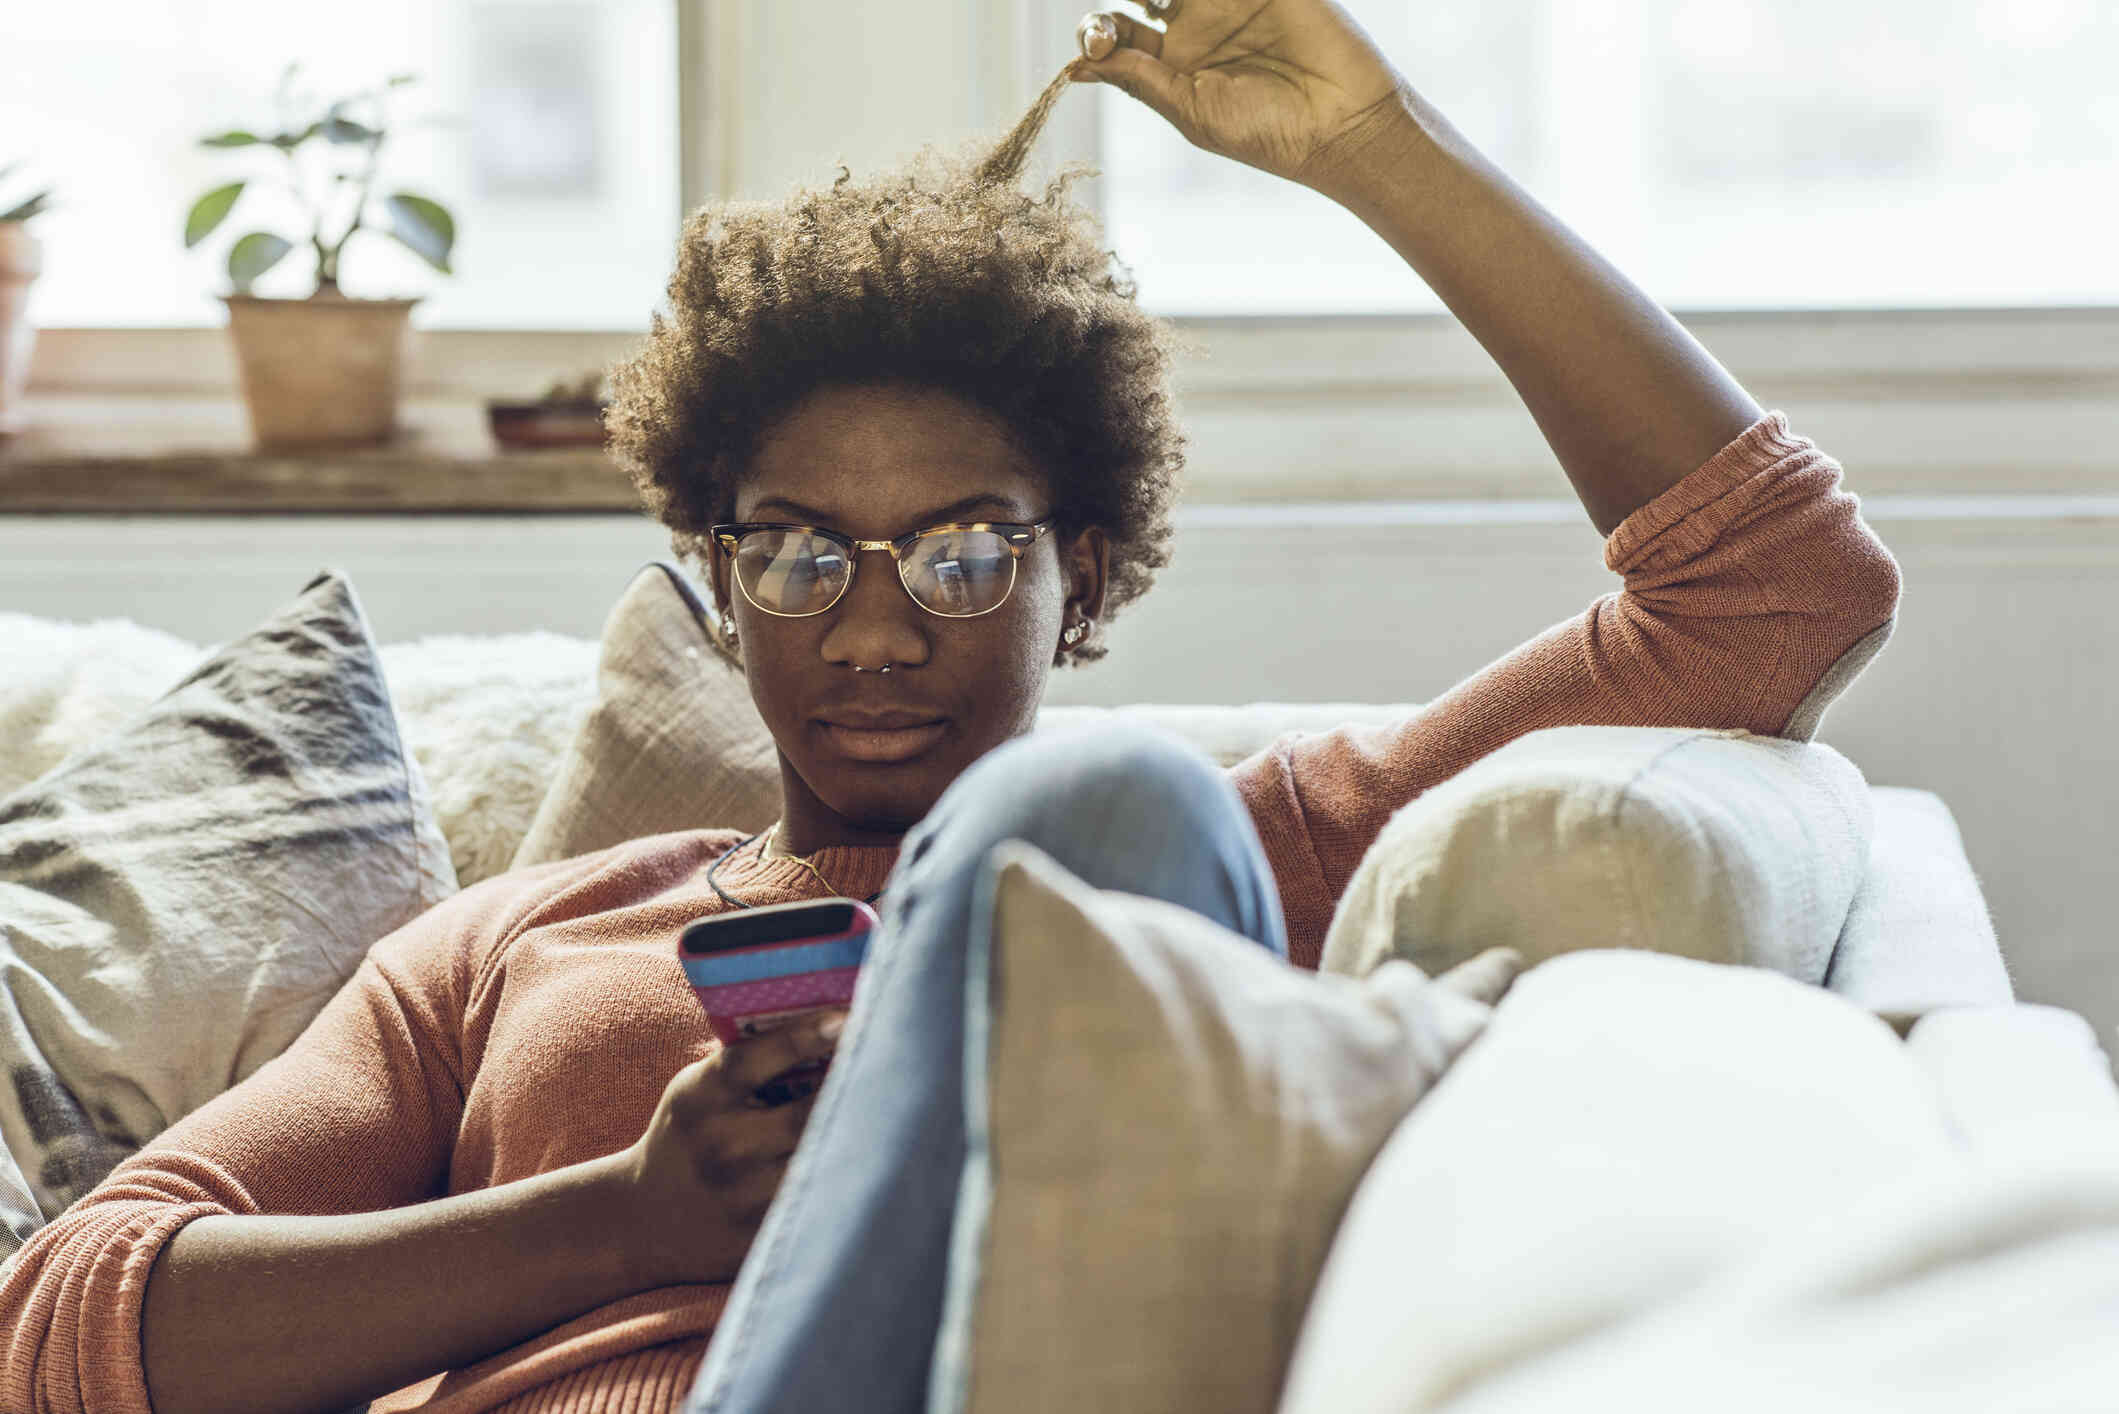 A woman with glasses reclines on the couch while playing with her hair and looking at the cellphone in her hand.